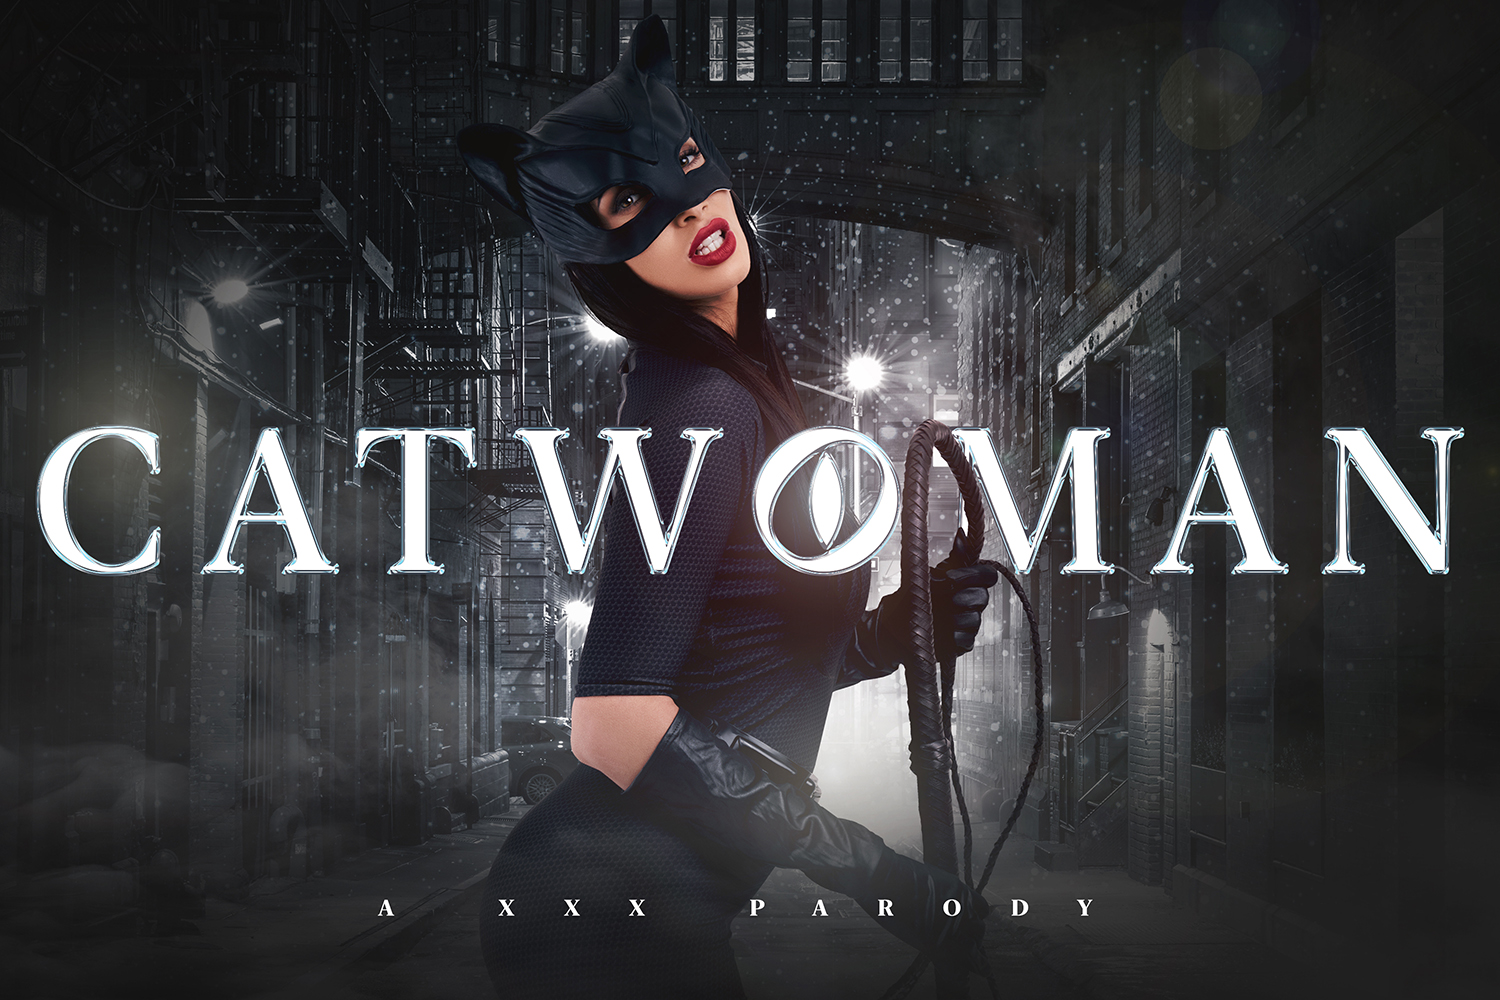 anthony haygood recommends Cat Woman Xxx